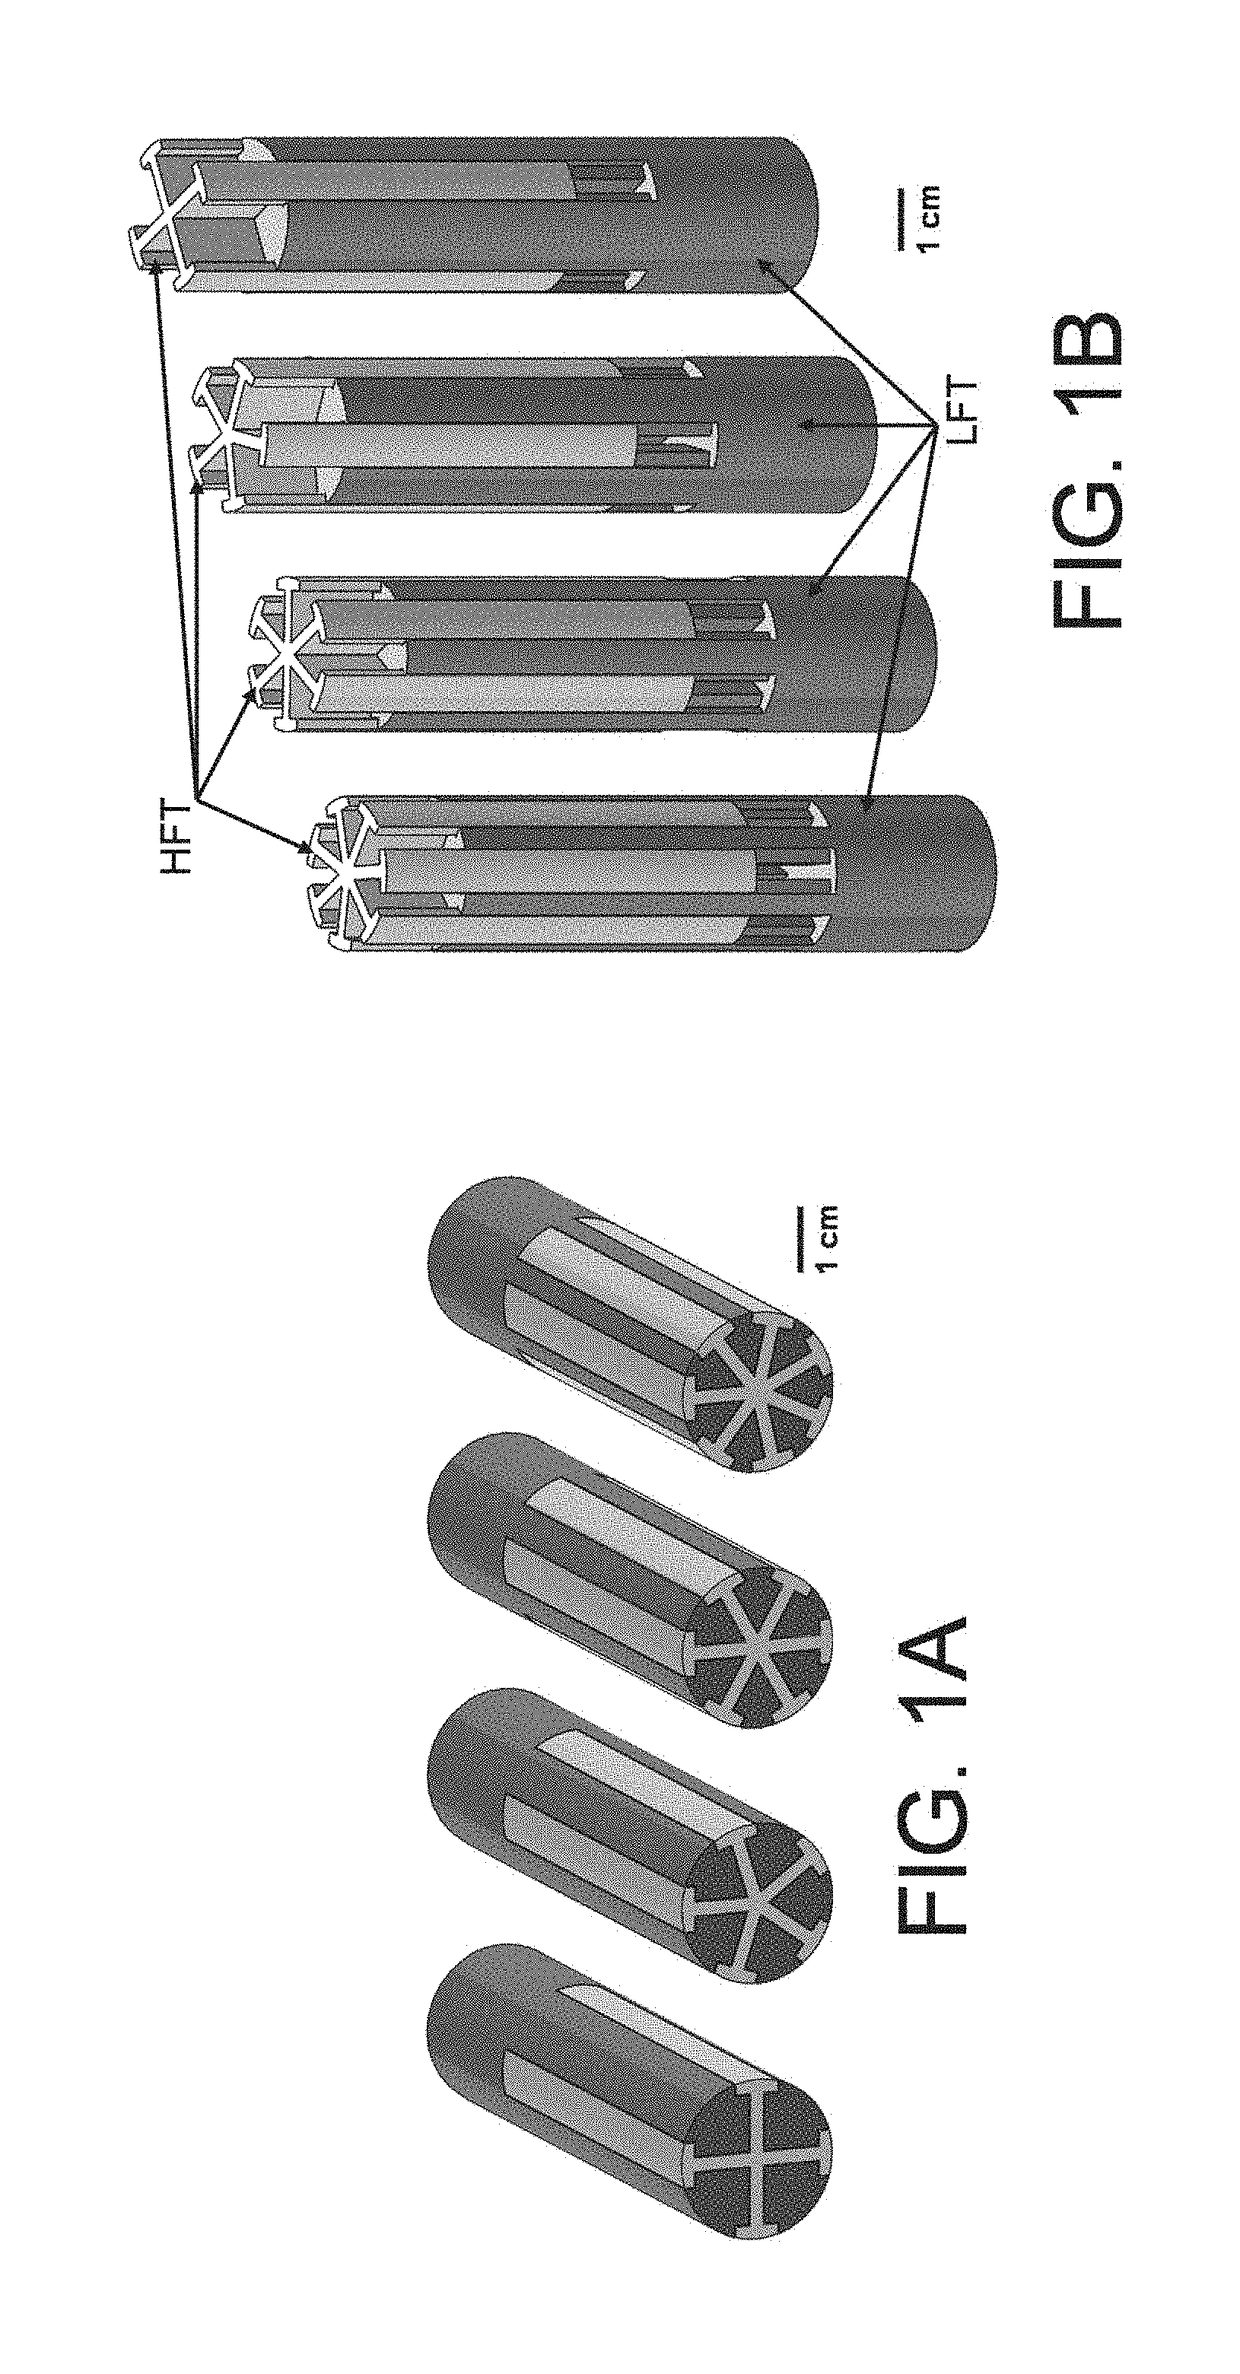 Multi-material polymer filament for three-dimensional printing co-drawn with functional or structural thread